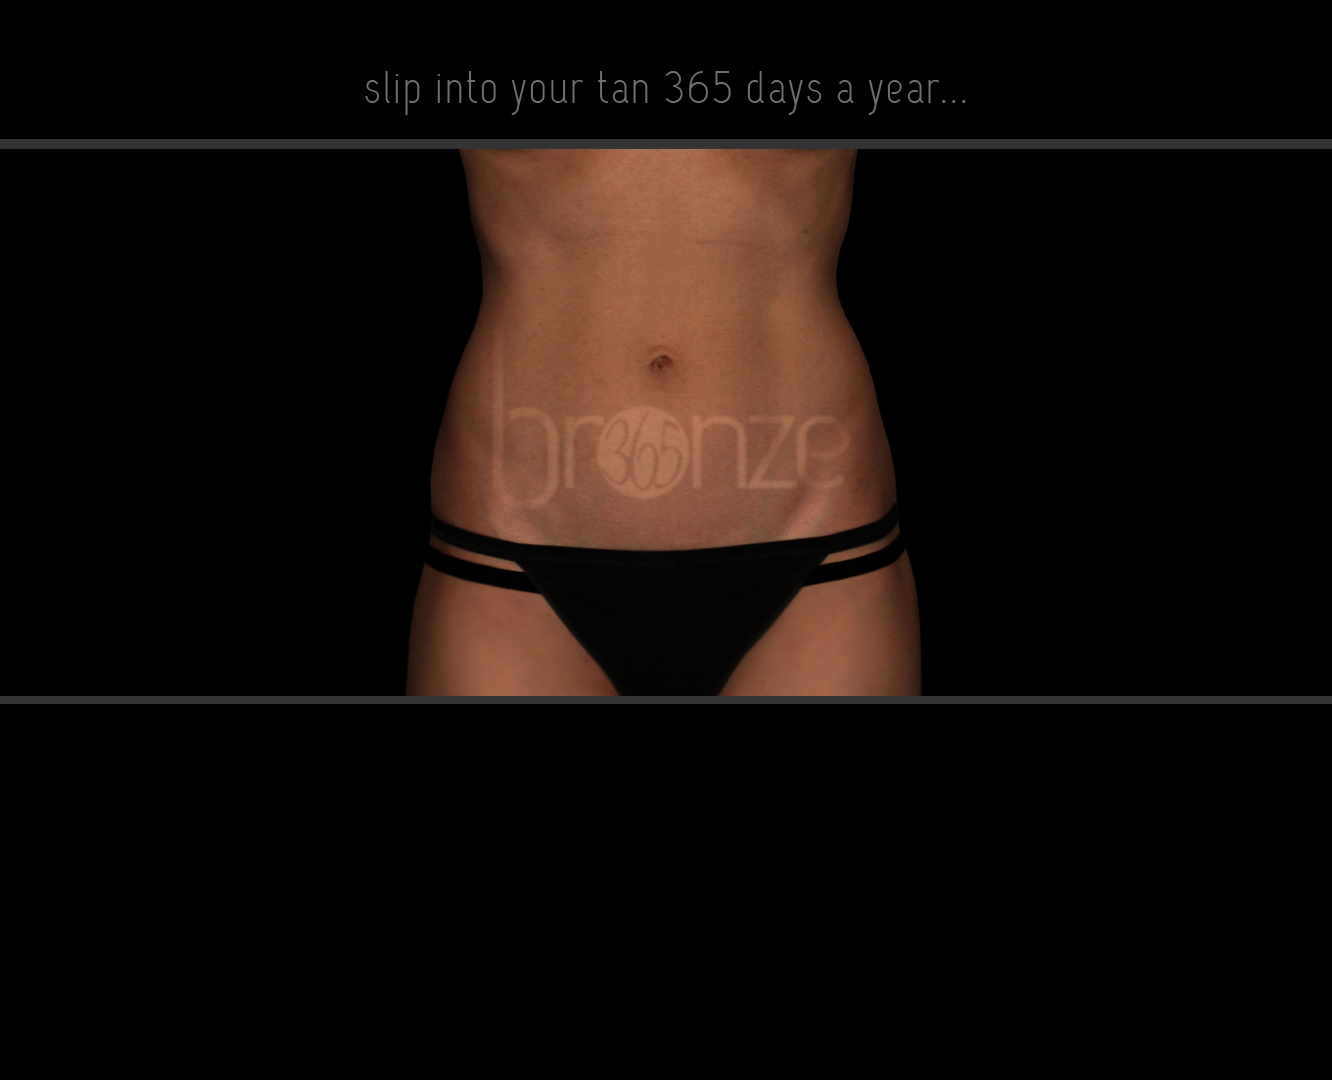 Slip into your tan with Bronze365